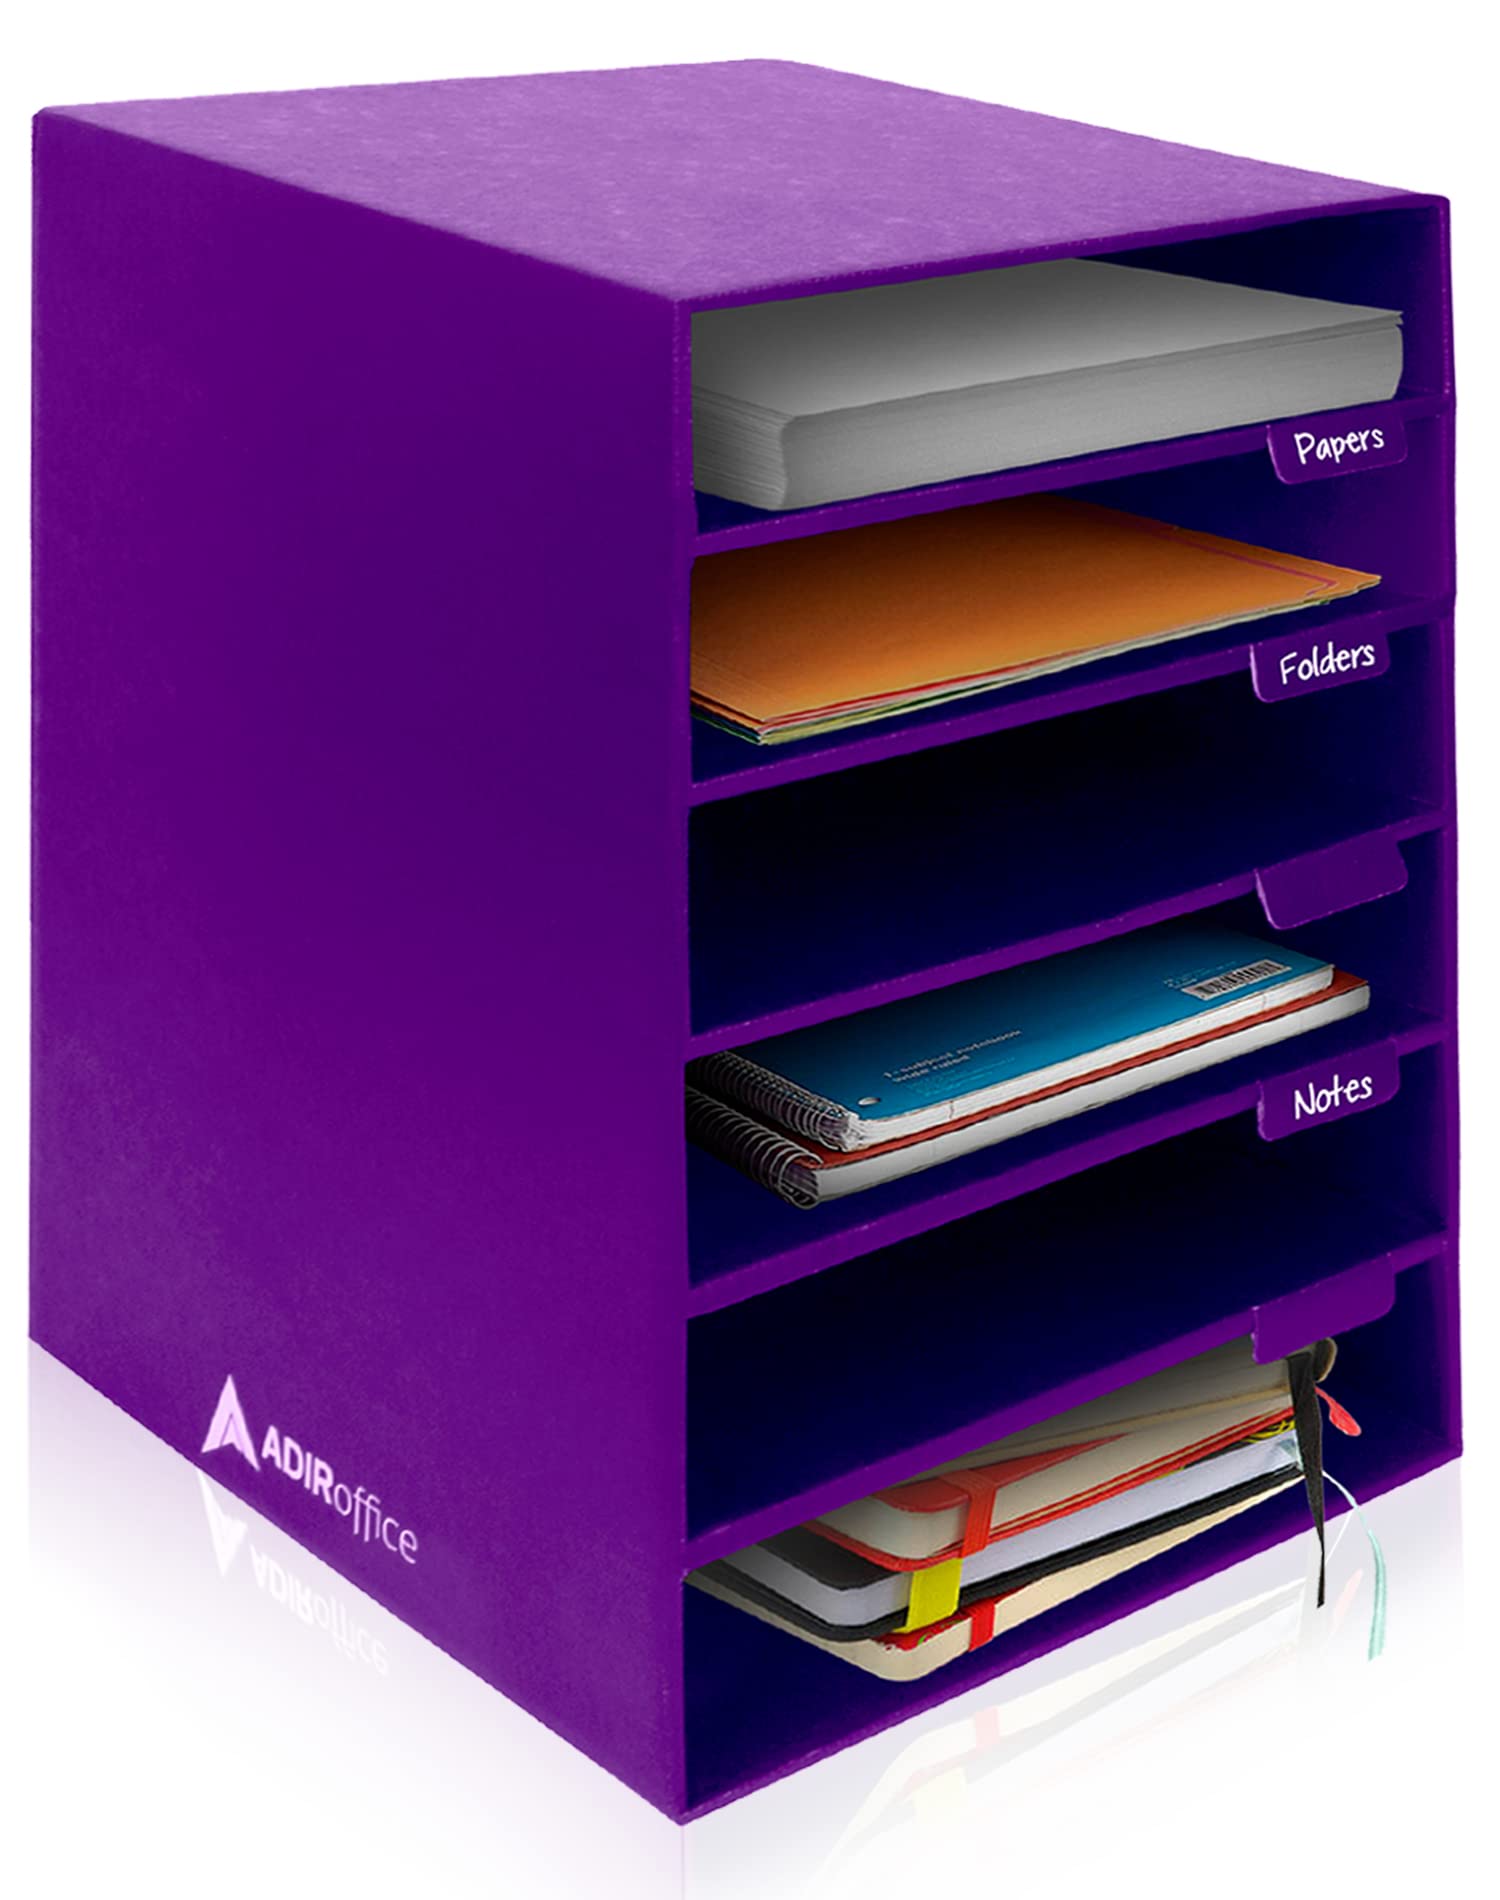 AdirOffice Cardboard Paper Organizer - Classroom Mailbox, Literature Organizers, Office Sorter Mailboxes, Construction Papers Storage with Slots, Compartment Shelf Holder (6 Slot, Purple)  - Like New